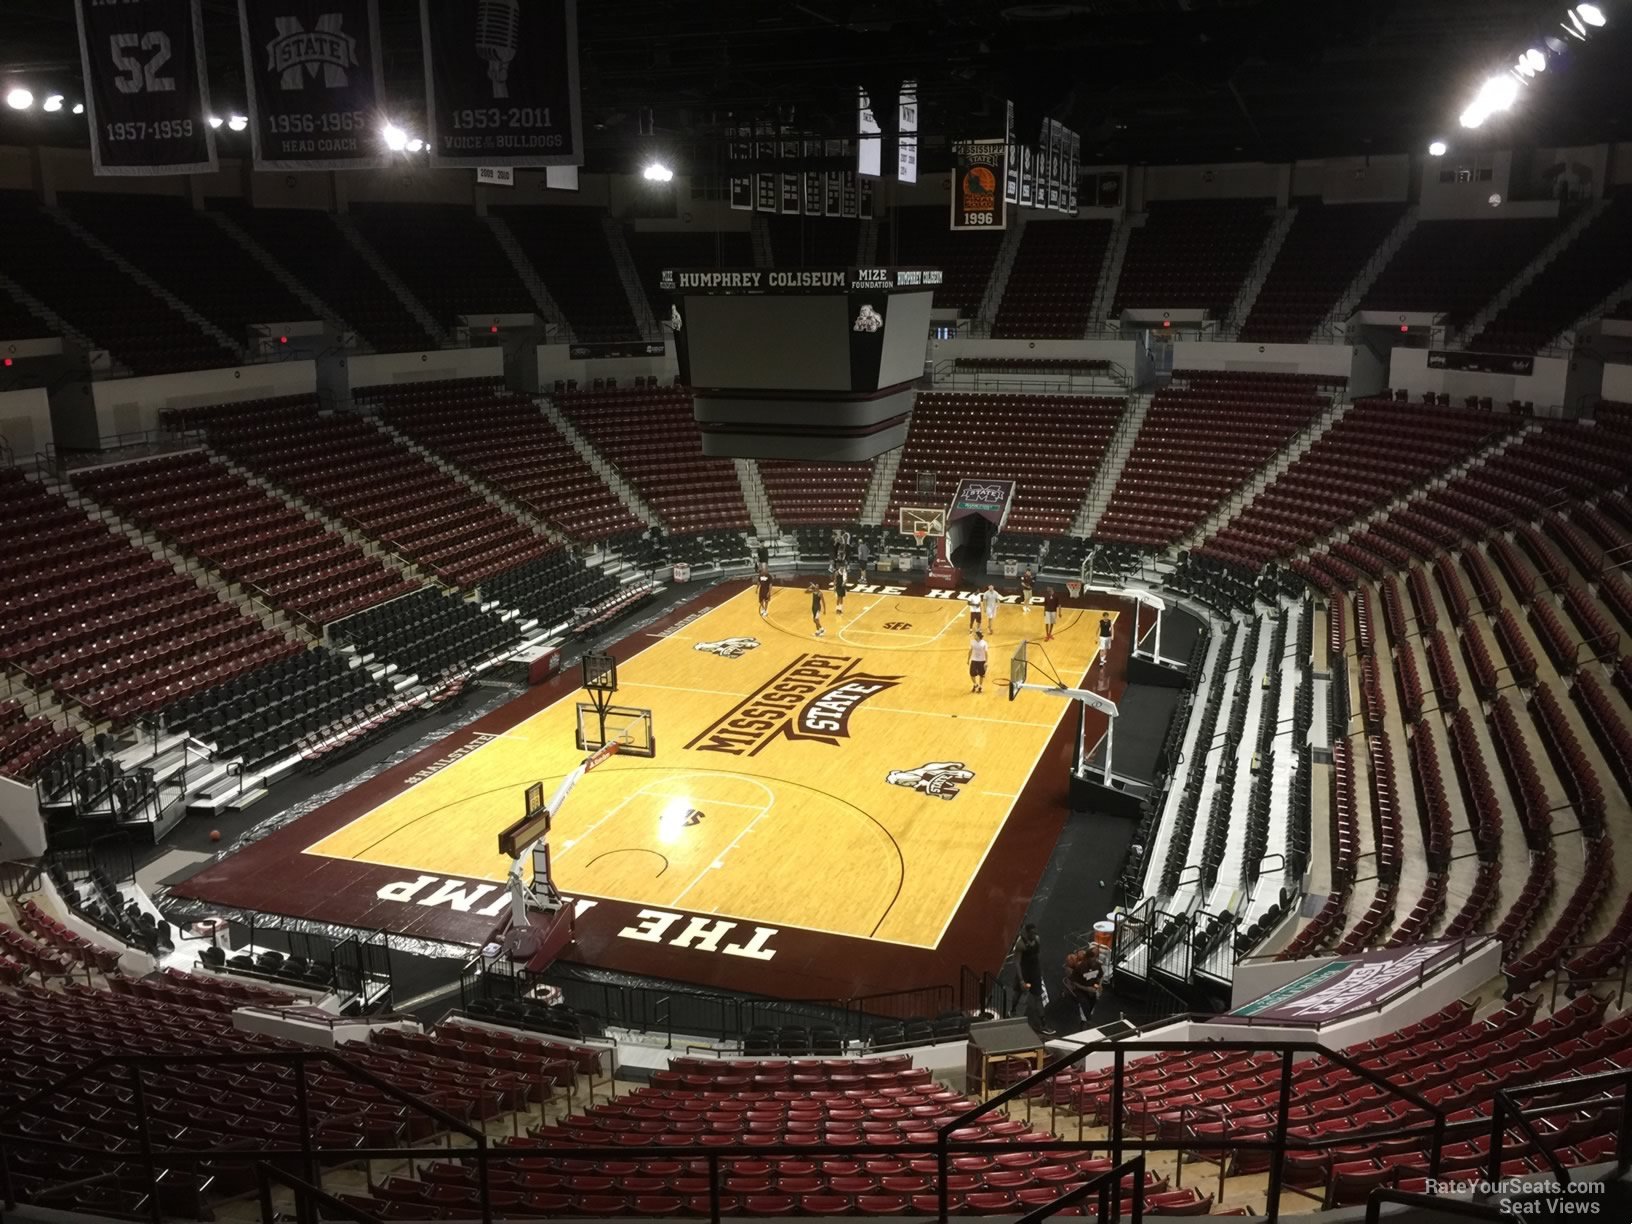 section 217, row 8 seat view  - humphrey coliseum